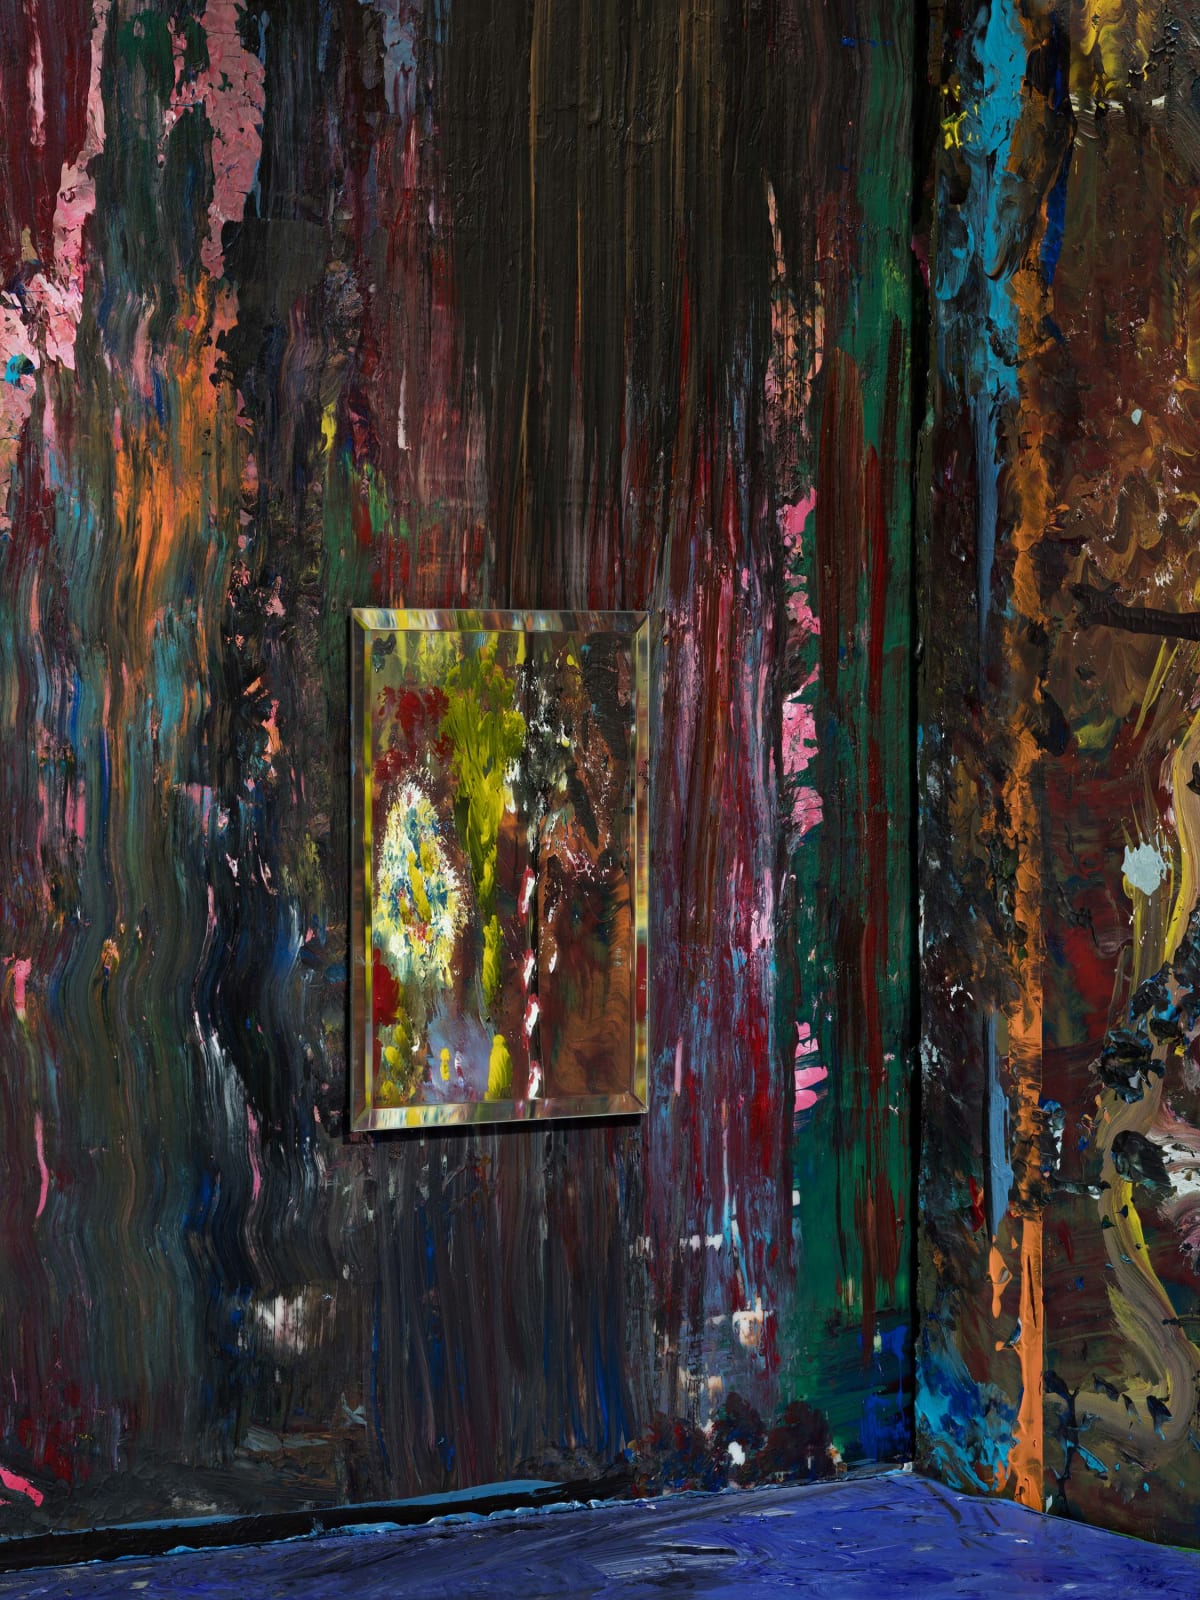 Abelardo Morell Paint #18 vertical photograph of a painting of an interior with an artwork hanging with paint all over it